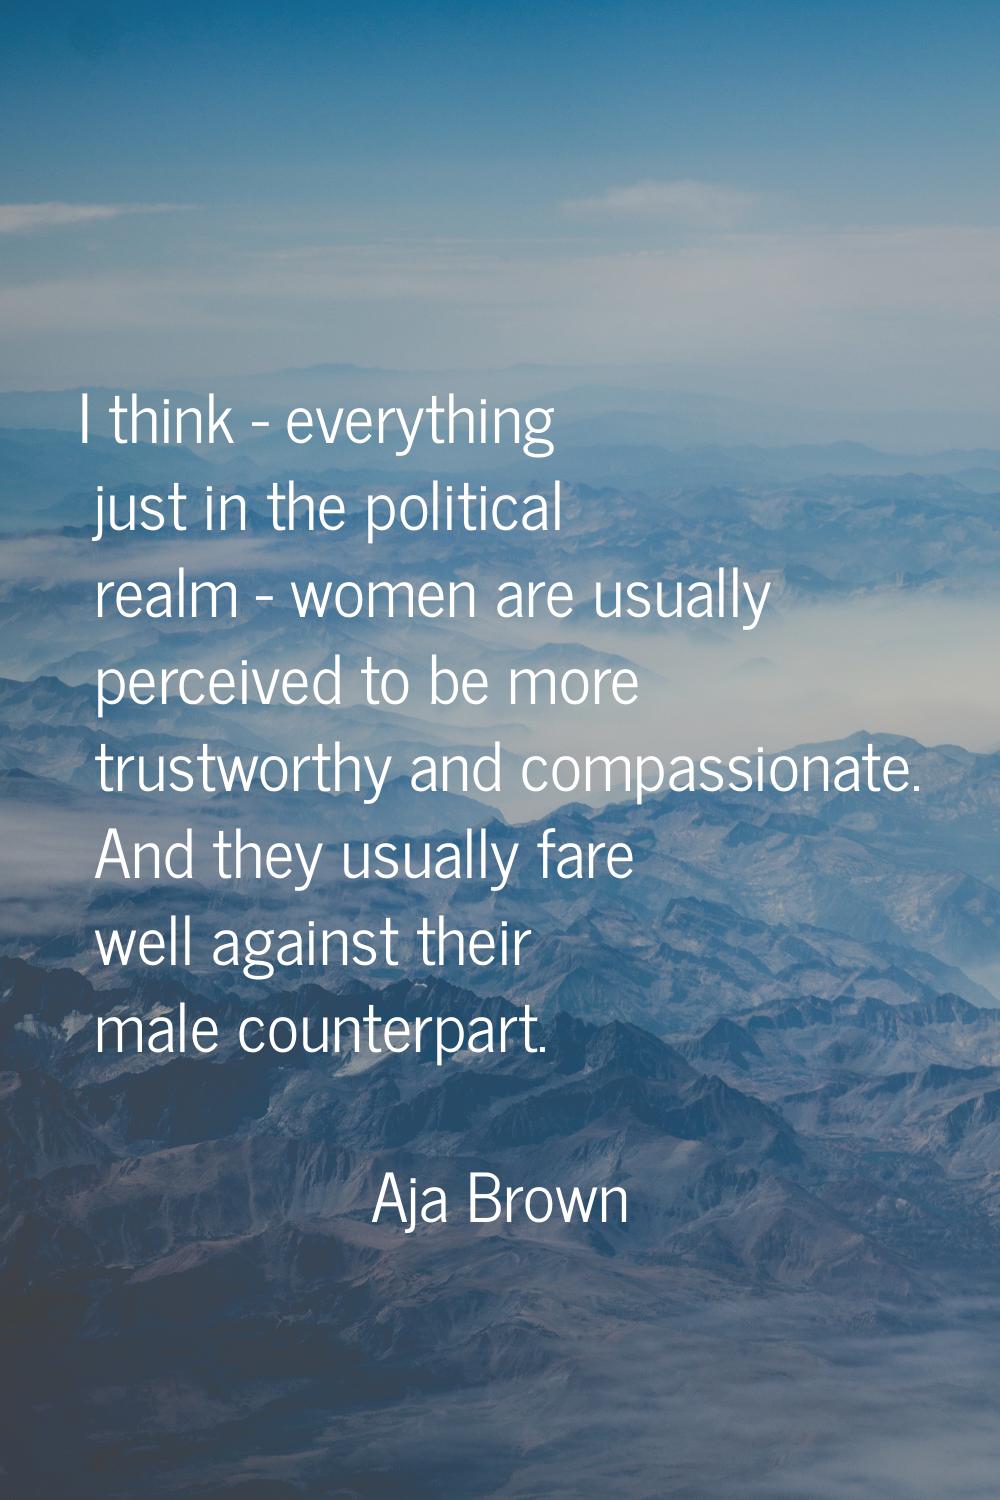 I think - everything just in the political realm - women are usually perceived to be more trustwort